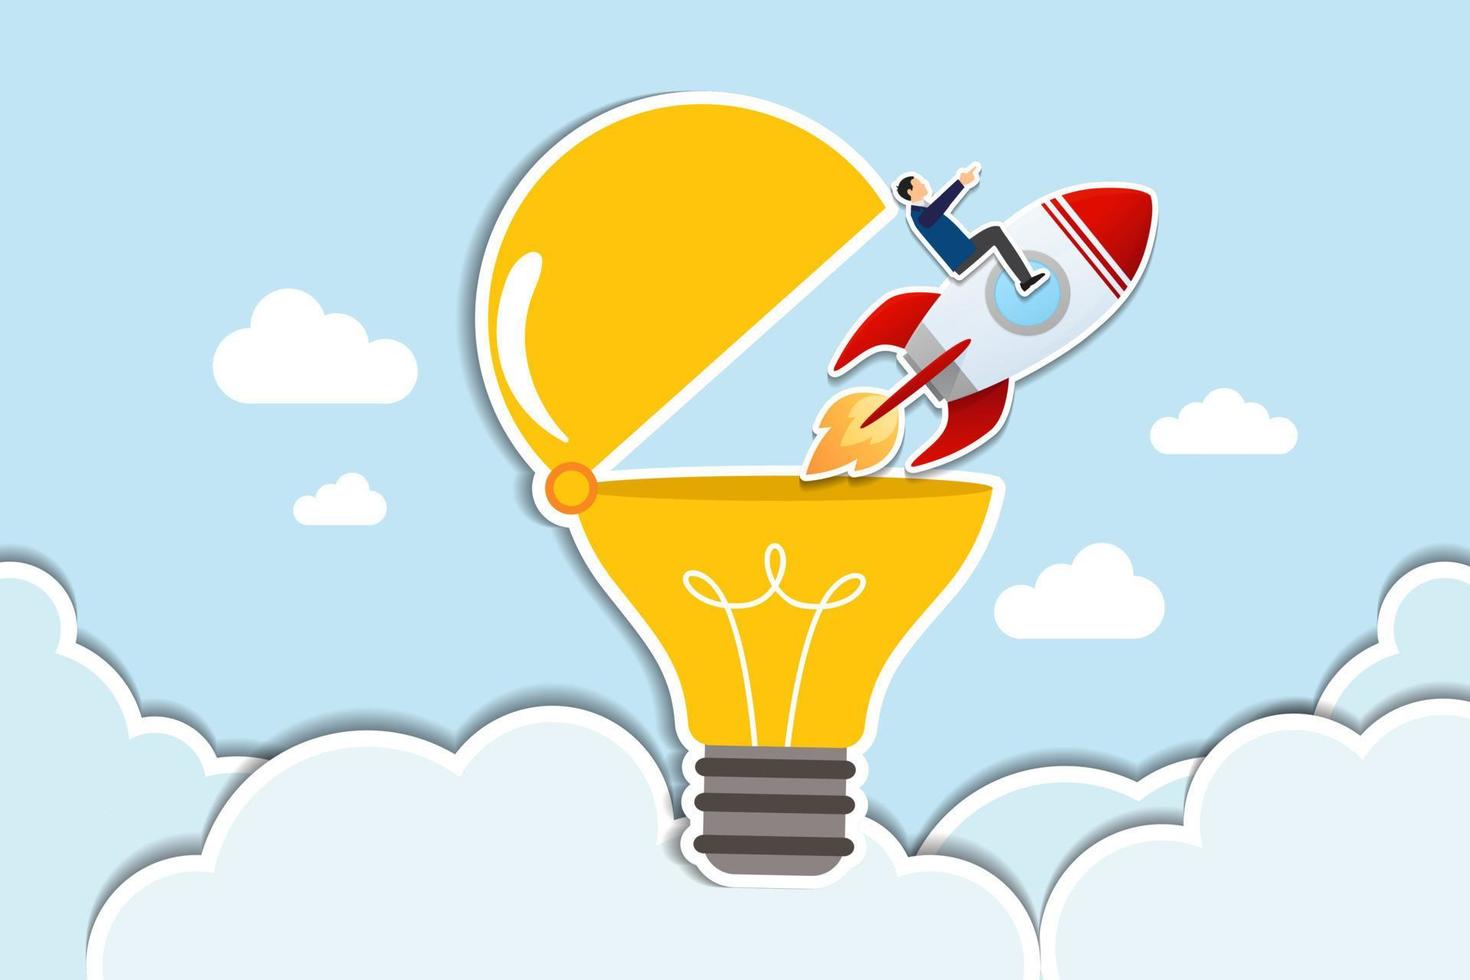 Innovation  idea, entrepreneurship or startup, creativity to begin business or breakthrough idea concept, innovative rocket launch flying high from opening bright lightbulb idea. paper cut style vector